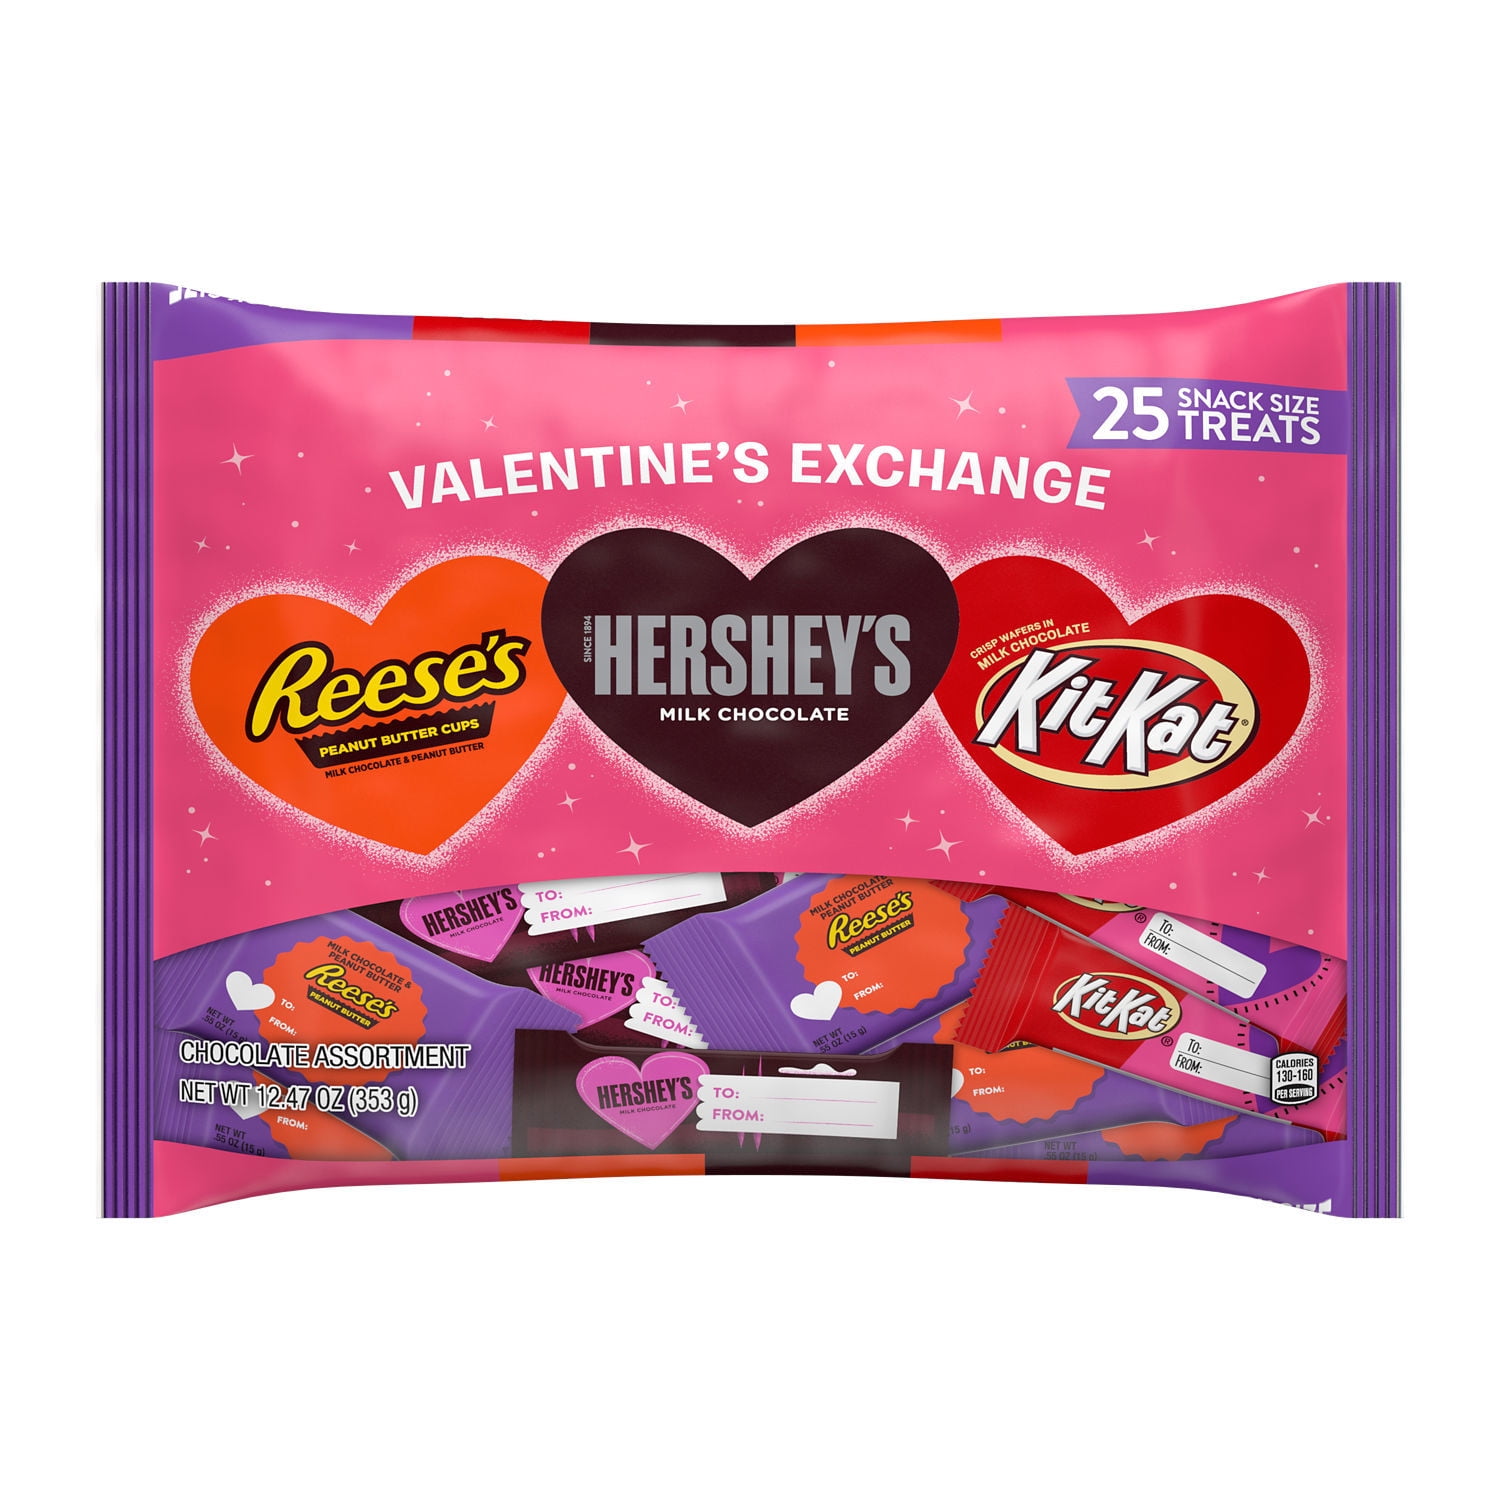 REESE'S, HERSHEY'S and KIT KAT®, Milk Chocolate Assortment Snack Size Candy, Valentine's Day, 12.47 oz, Variety Bag (25 Pieces)